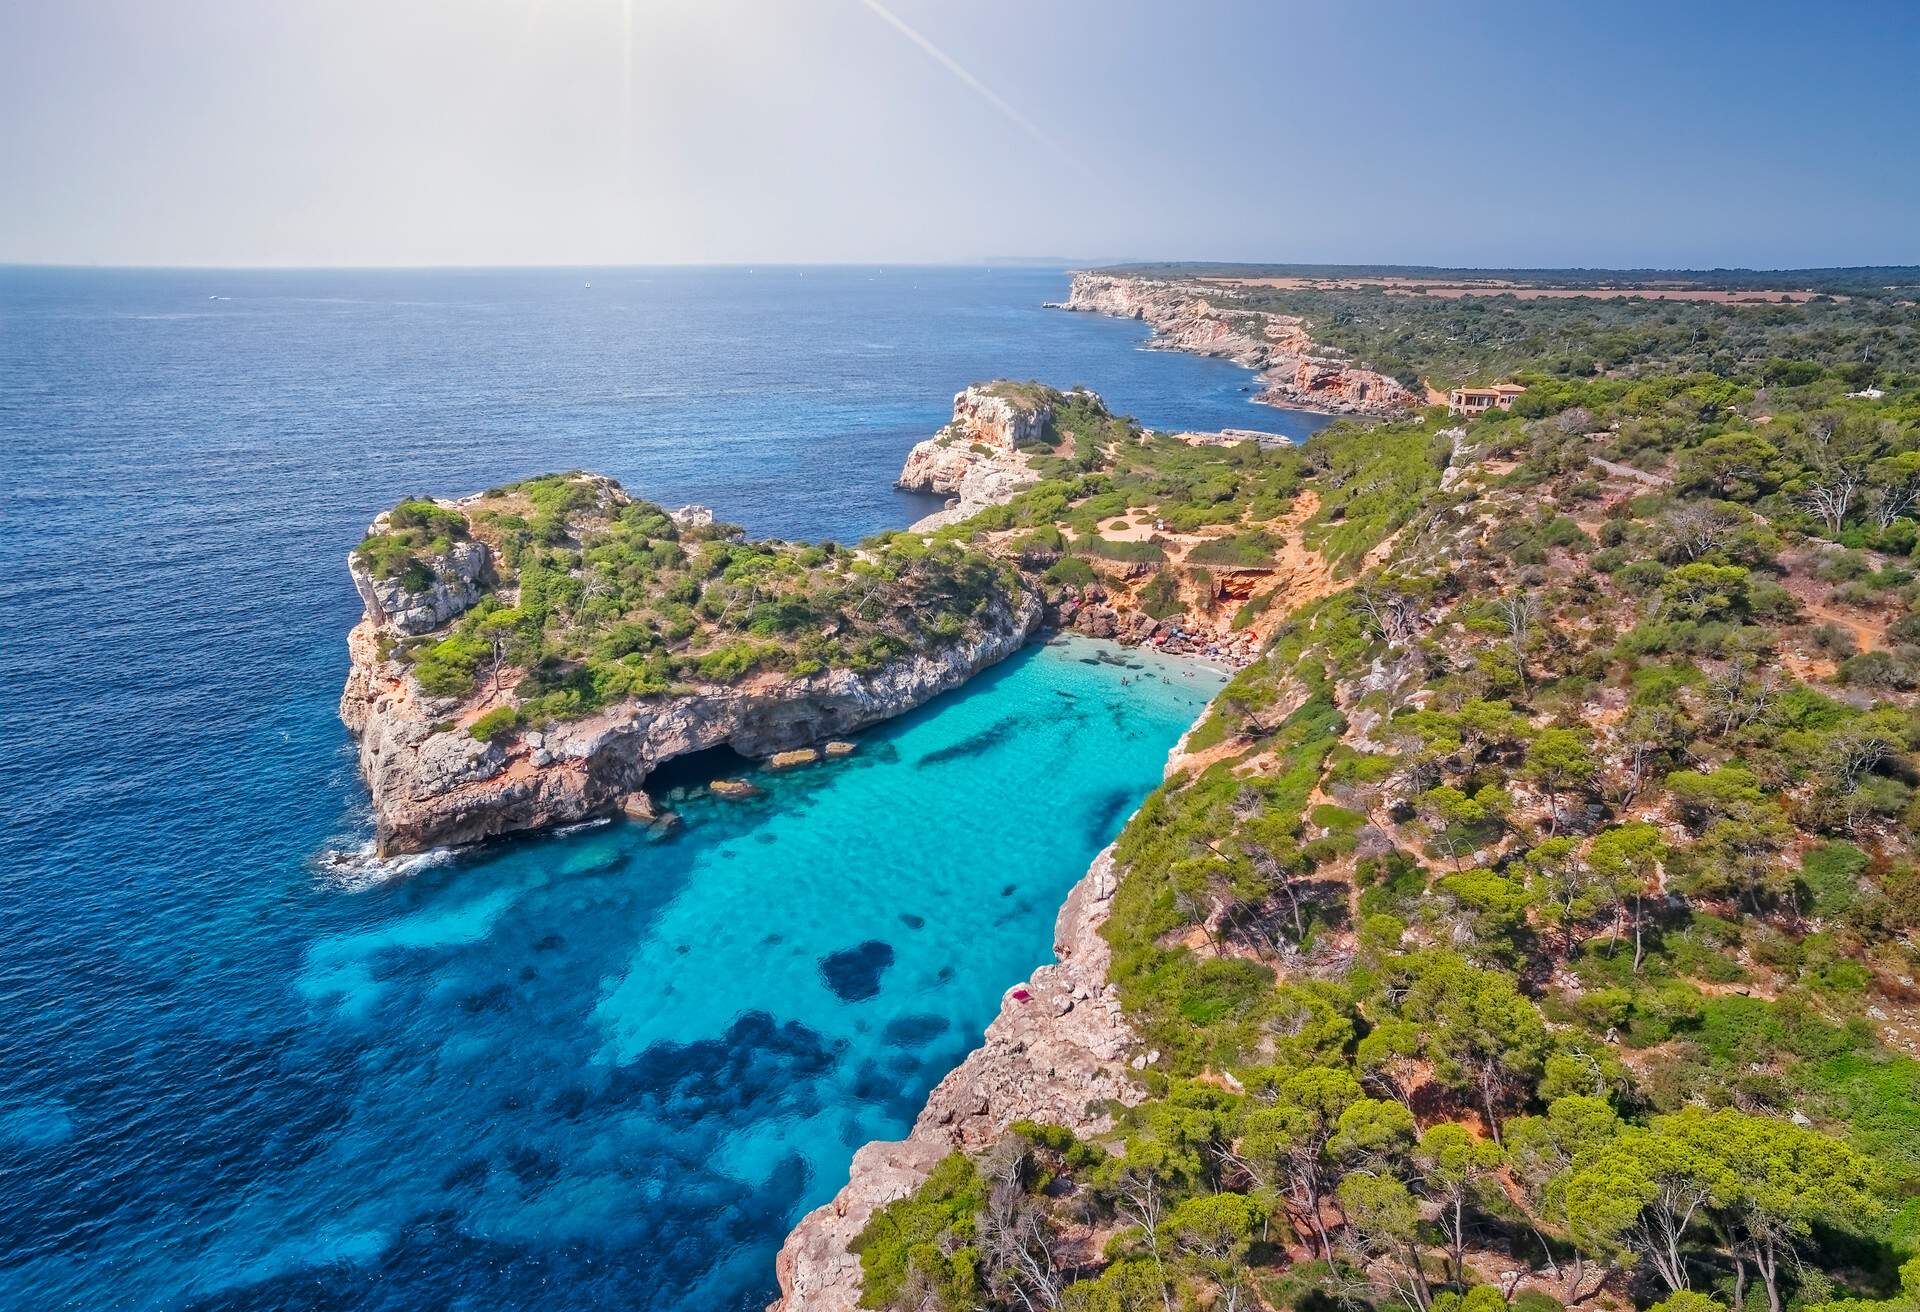 Caló des Moro ('small bay'), also Cala de Sa Comuna, is a bay in the southeast of the Spanish Balearic island of Mallorca. It is located on the coast of the municipality of Santanyí, southwest of the village of Cala Llombards, towards Cap de Ses Salines, the South Cape Mallorcas.